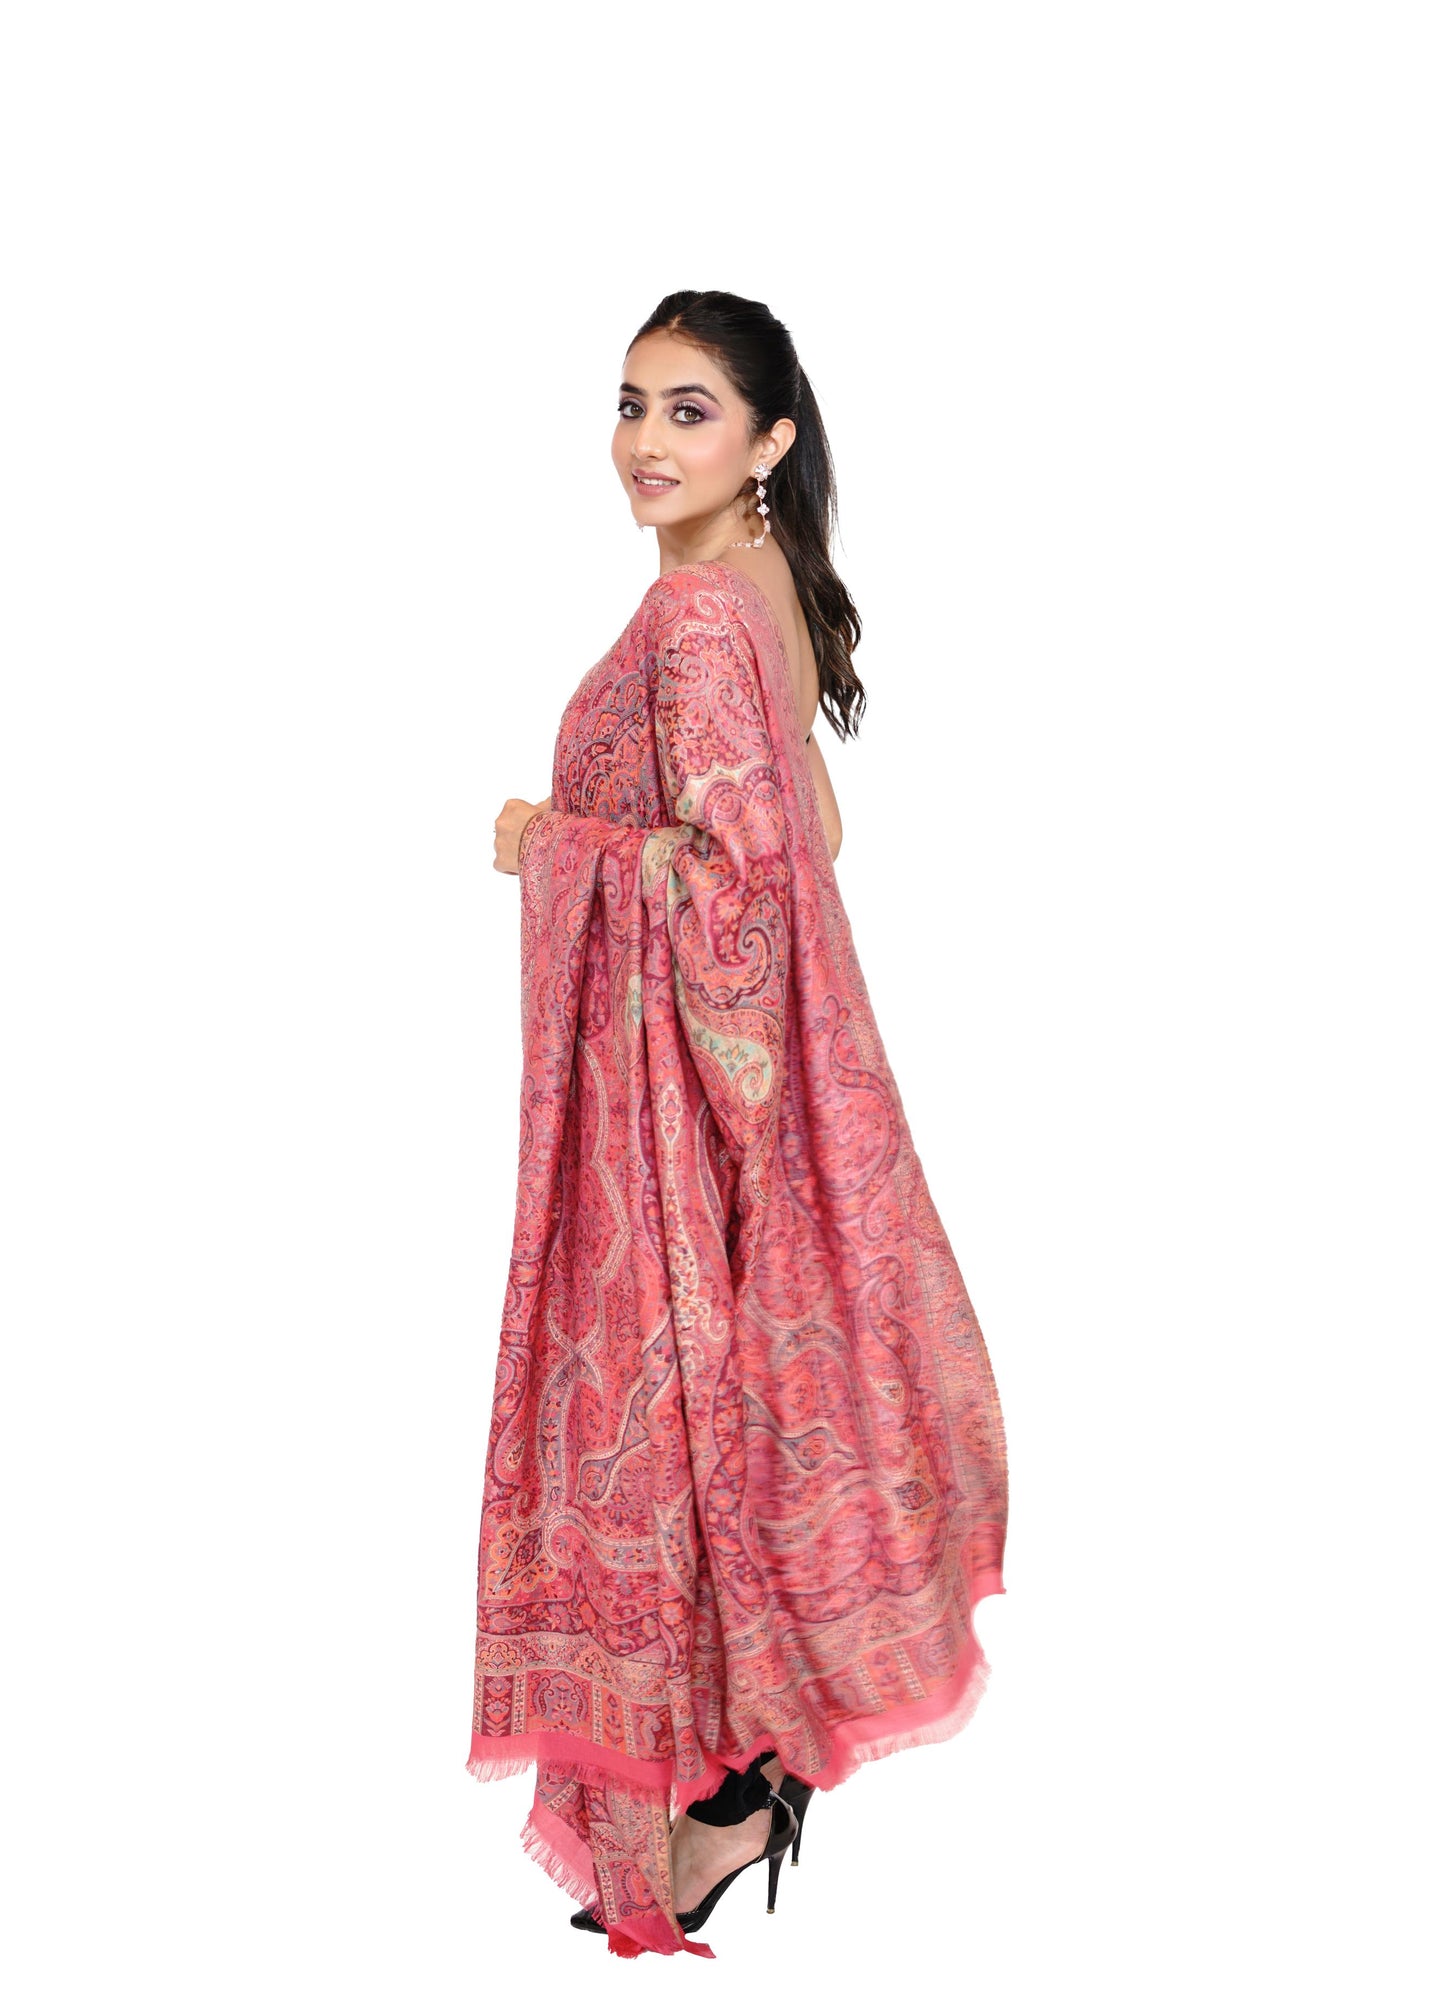 Traditional Bamboo Modal Pink Kani Shawl for Women | Full Size, Soft & Eco-friendly